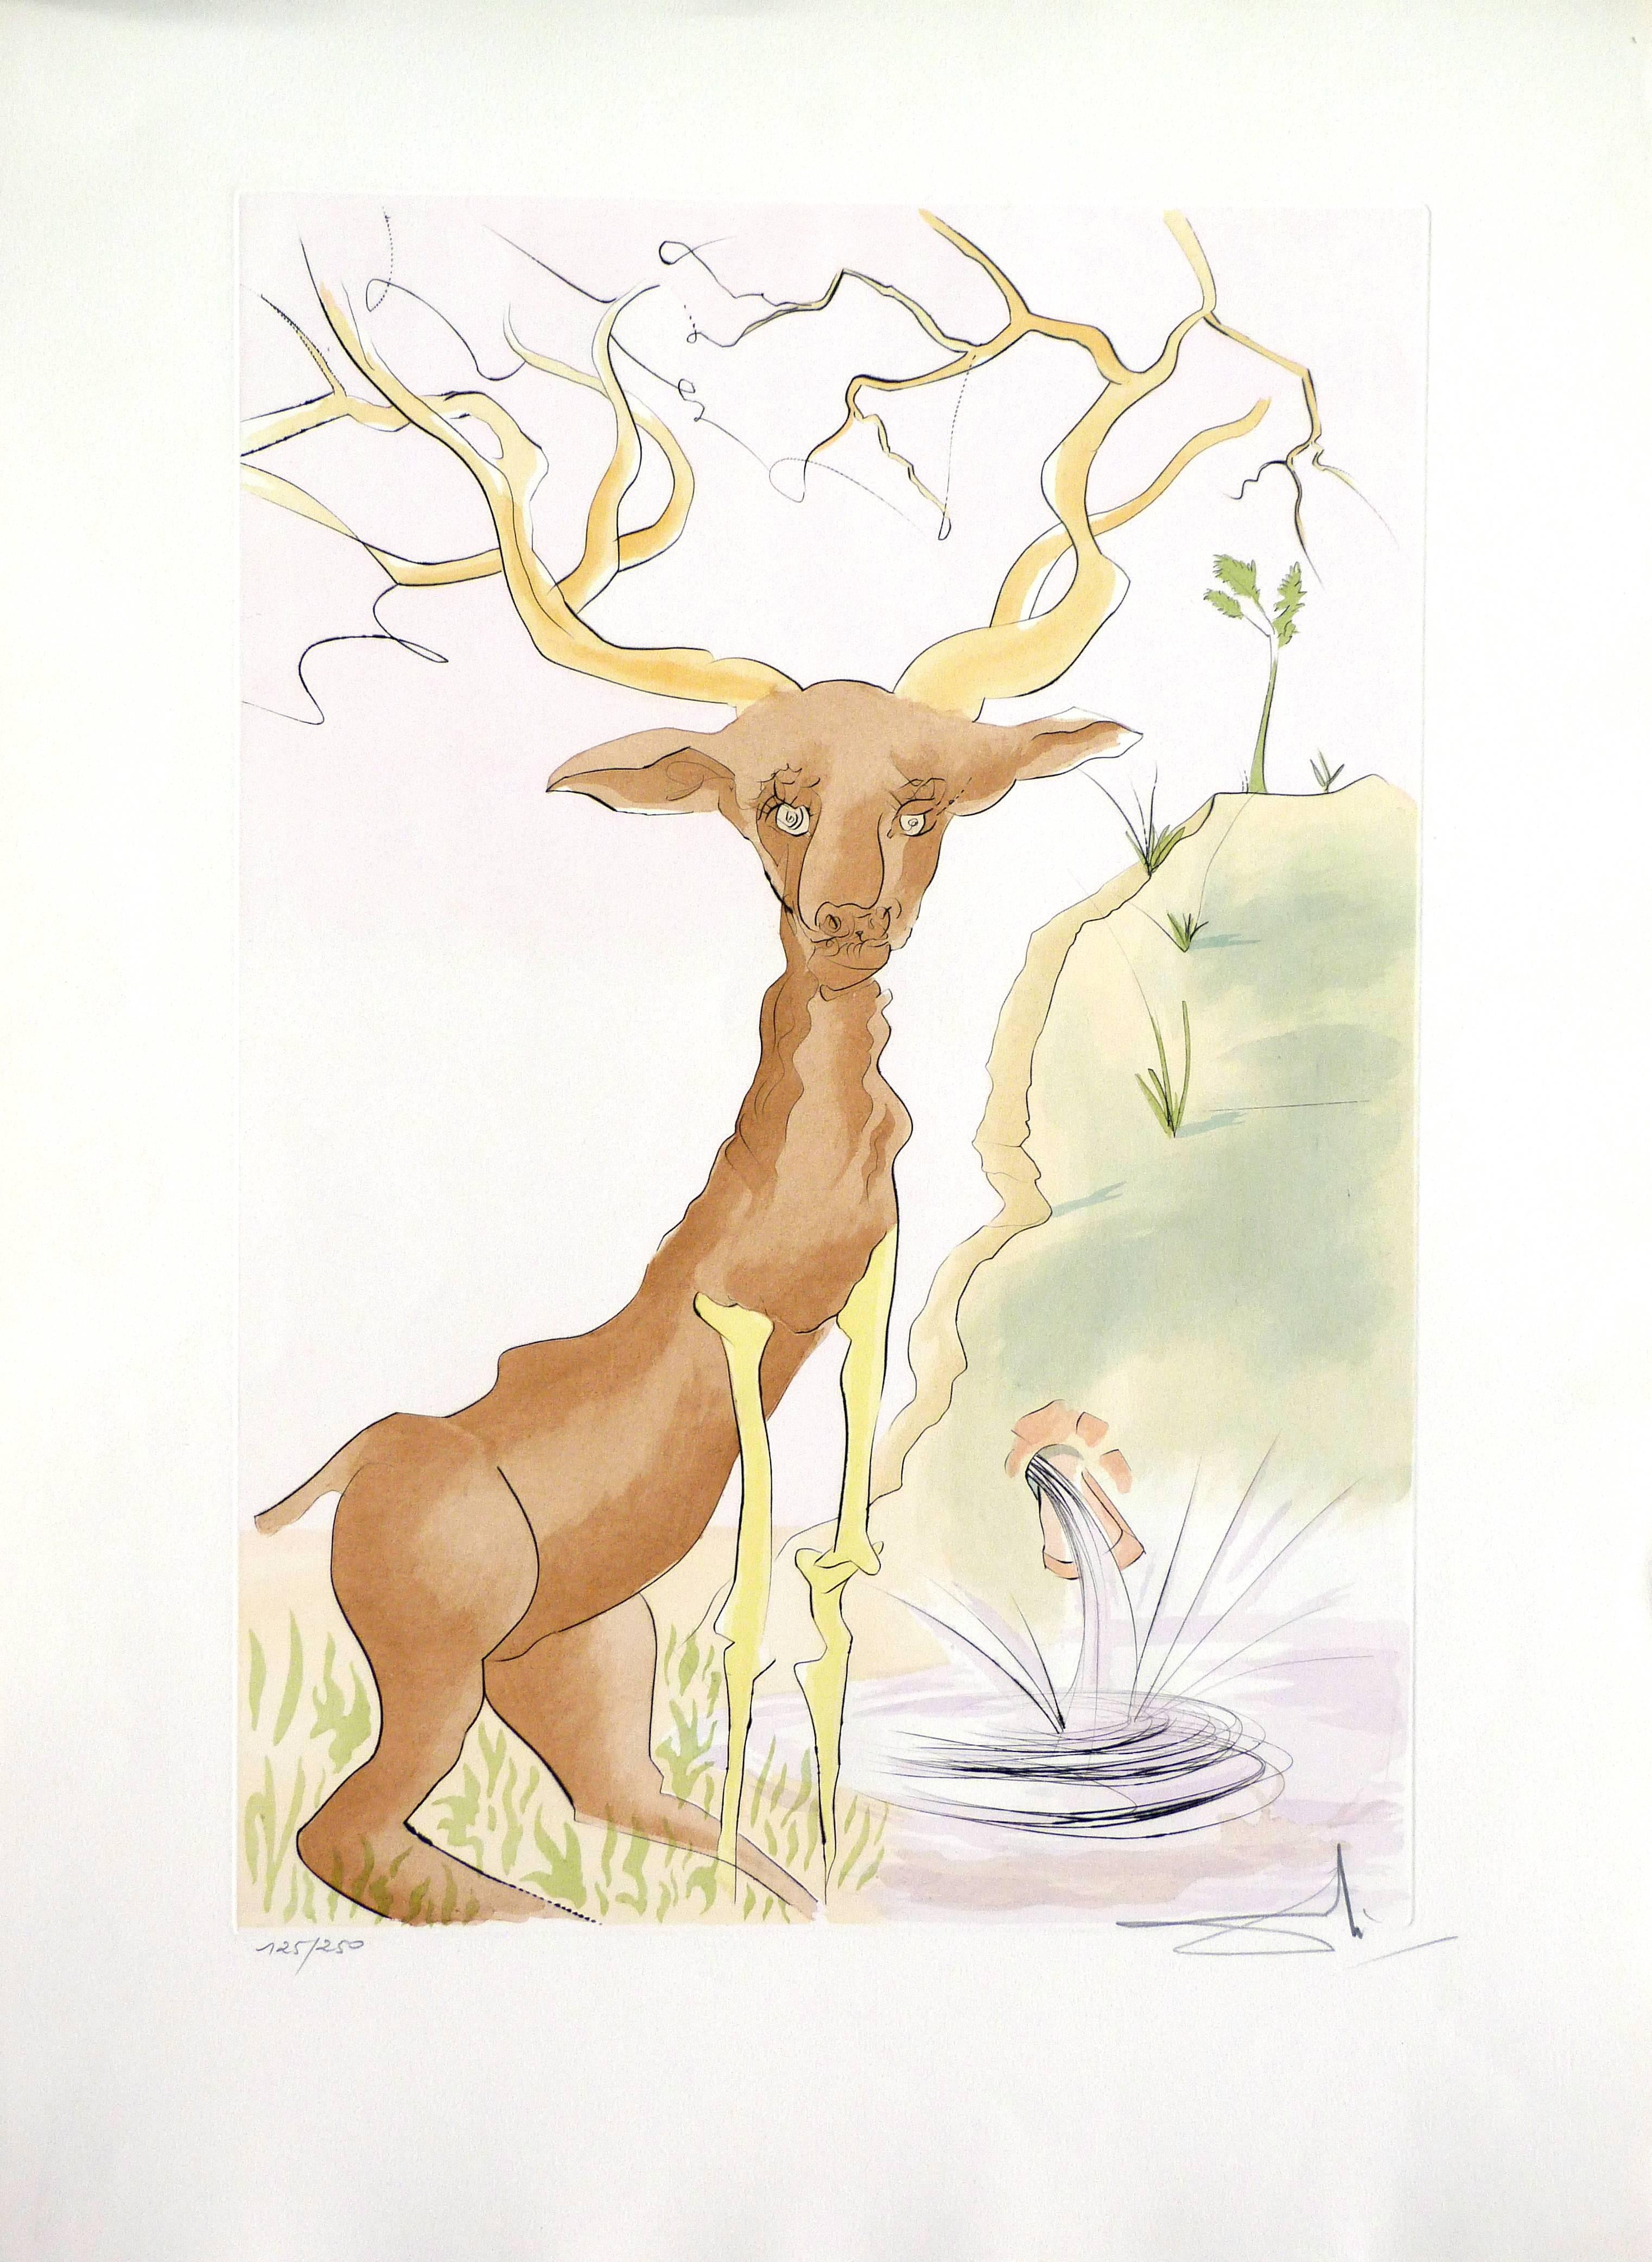 The surrealitst deer and his bone-shaped legs - Print by Salvador Dalí